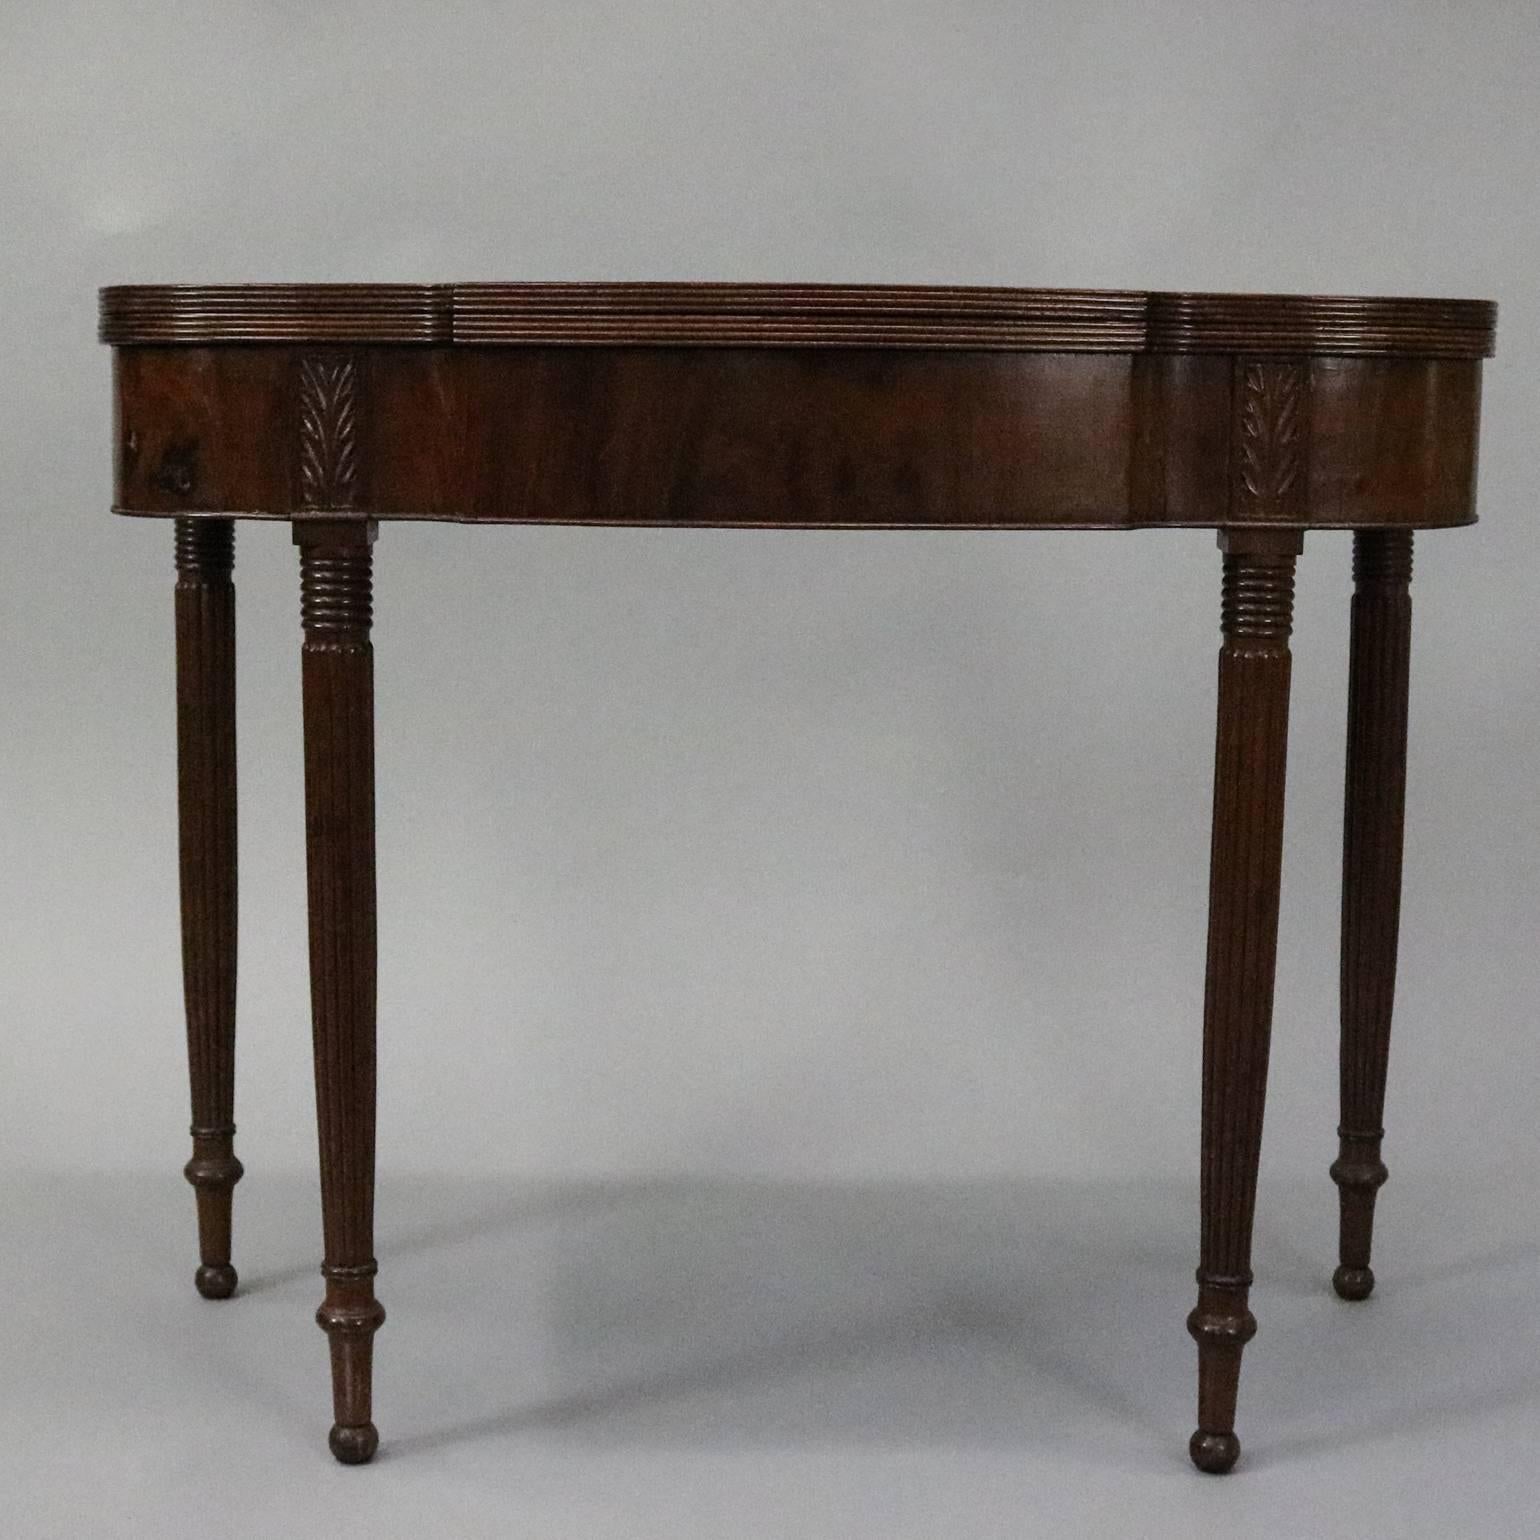 Antique Sheraton mahogany game table features reeded legs beneath carved acanthus die joints, scalloped top, circa 1830


Measures: 29